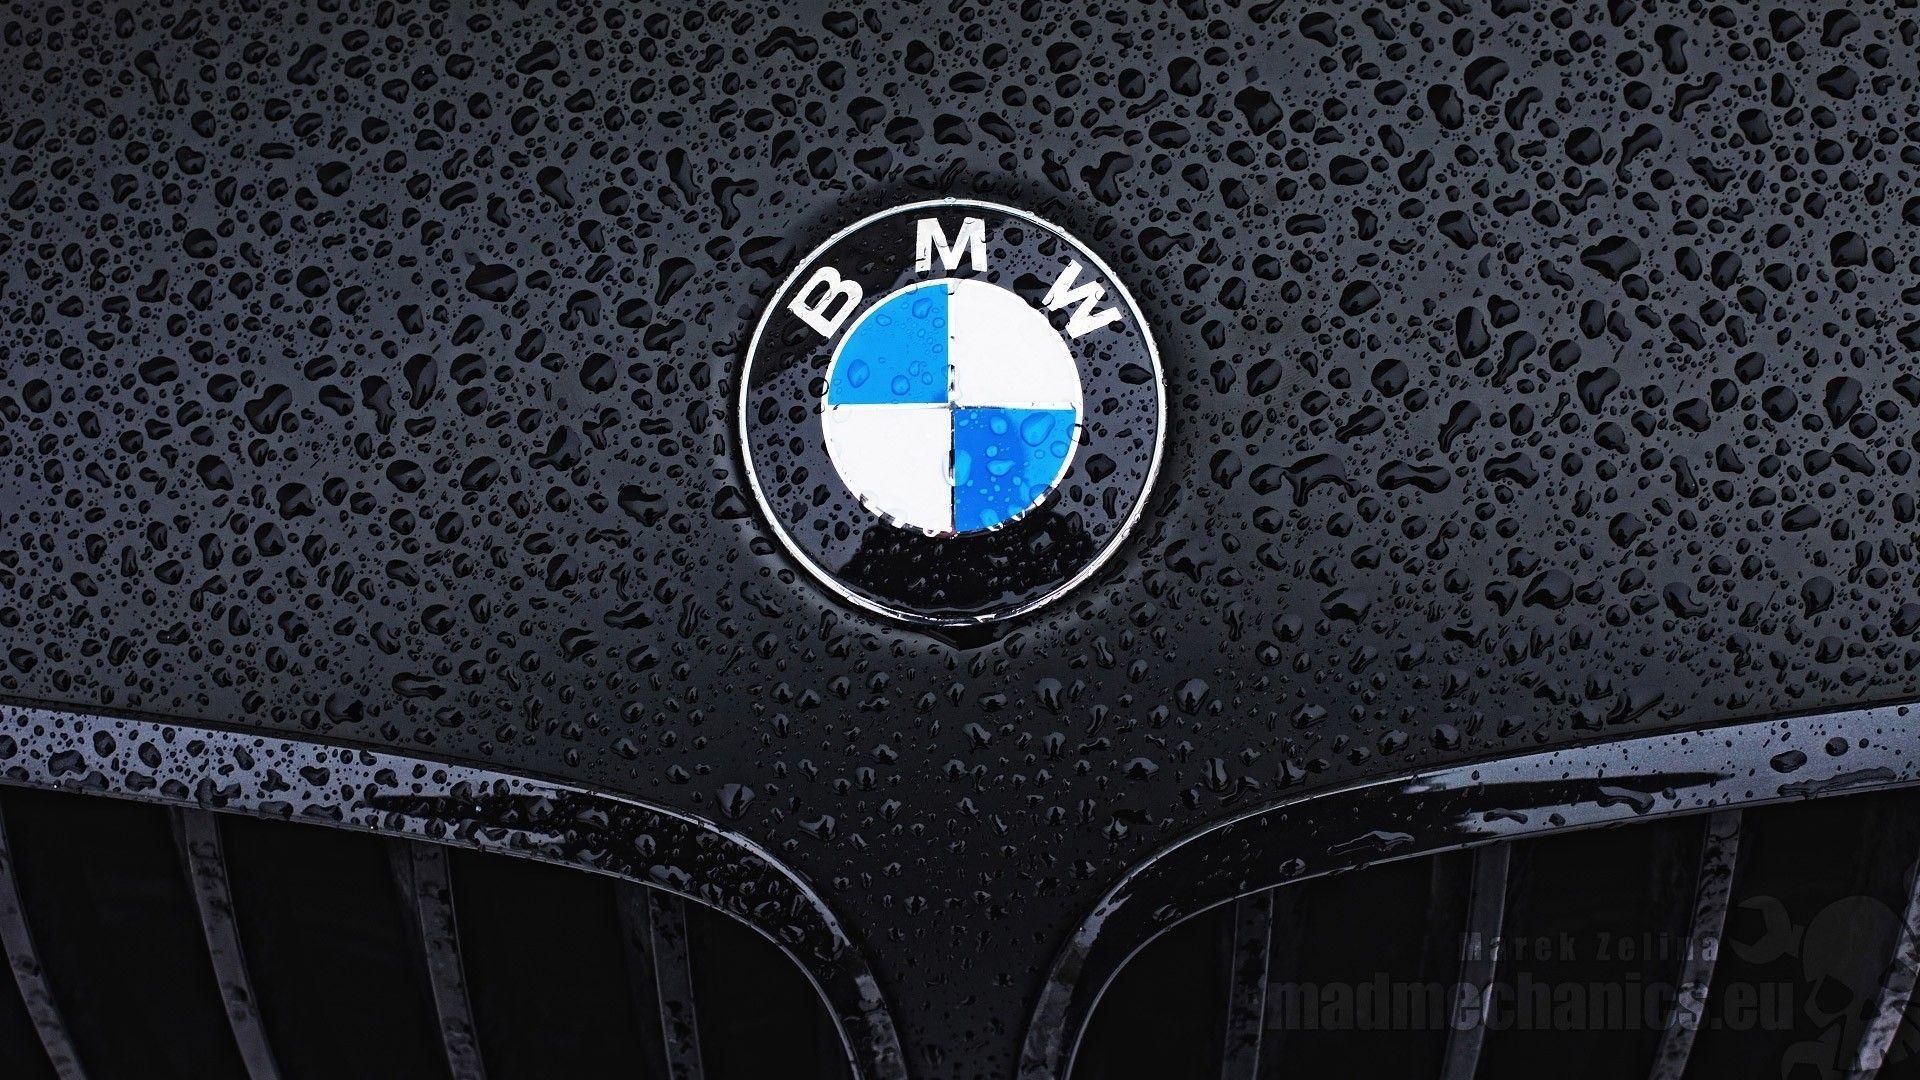 Wallpaper Of The Day: BMW Logo